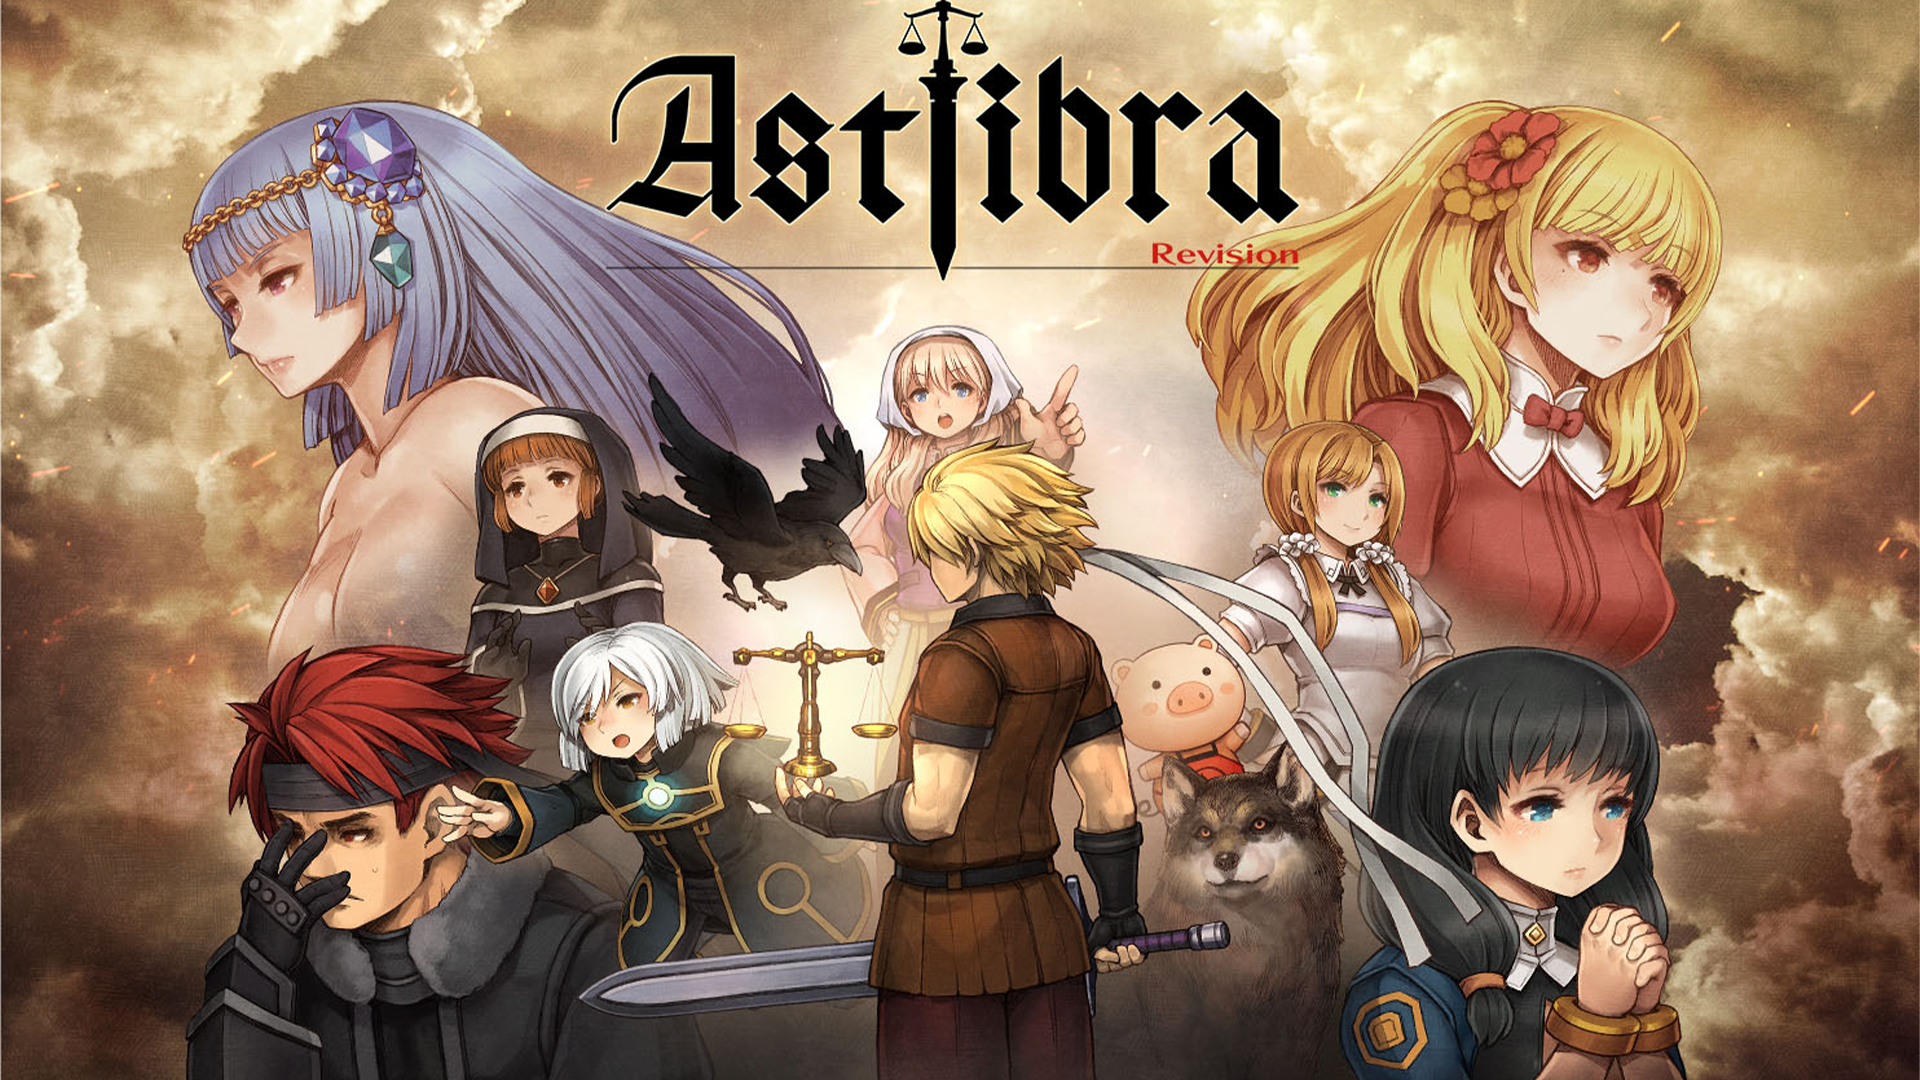 Banner of ASTLIBRA Revisione 